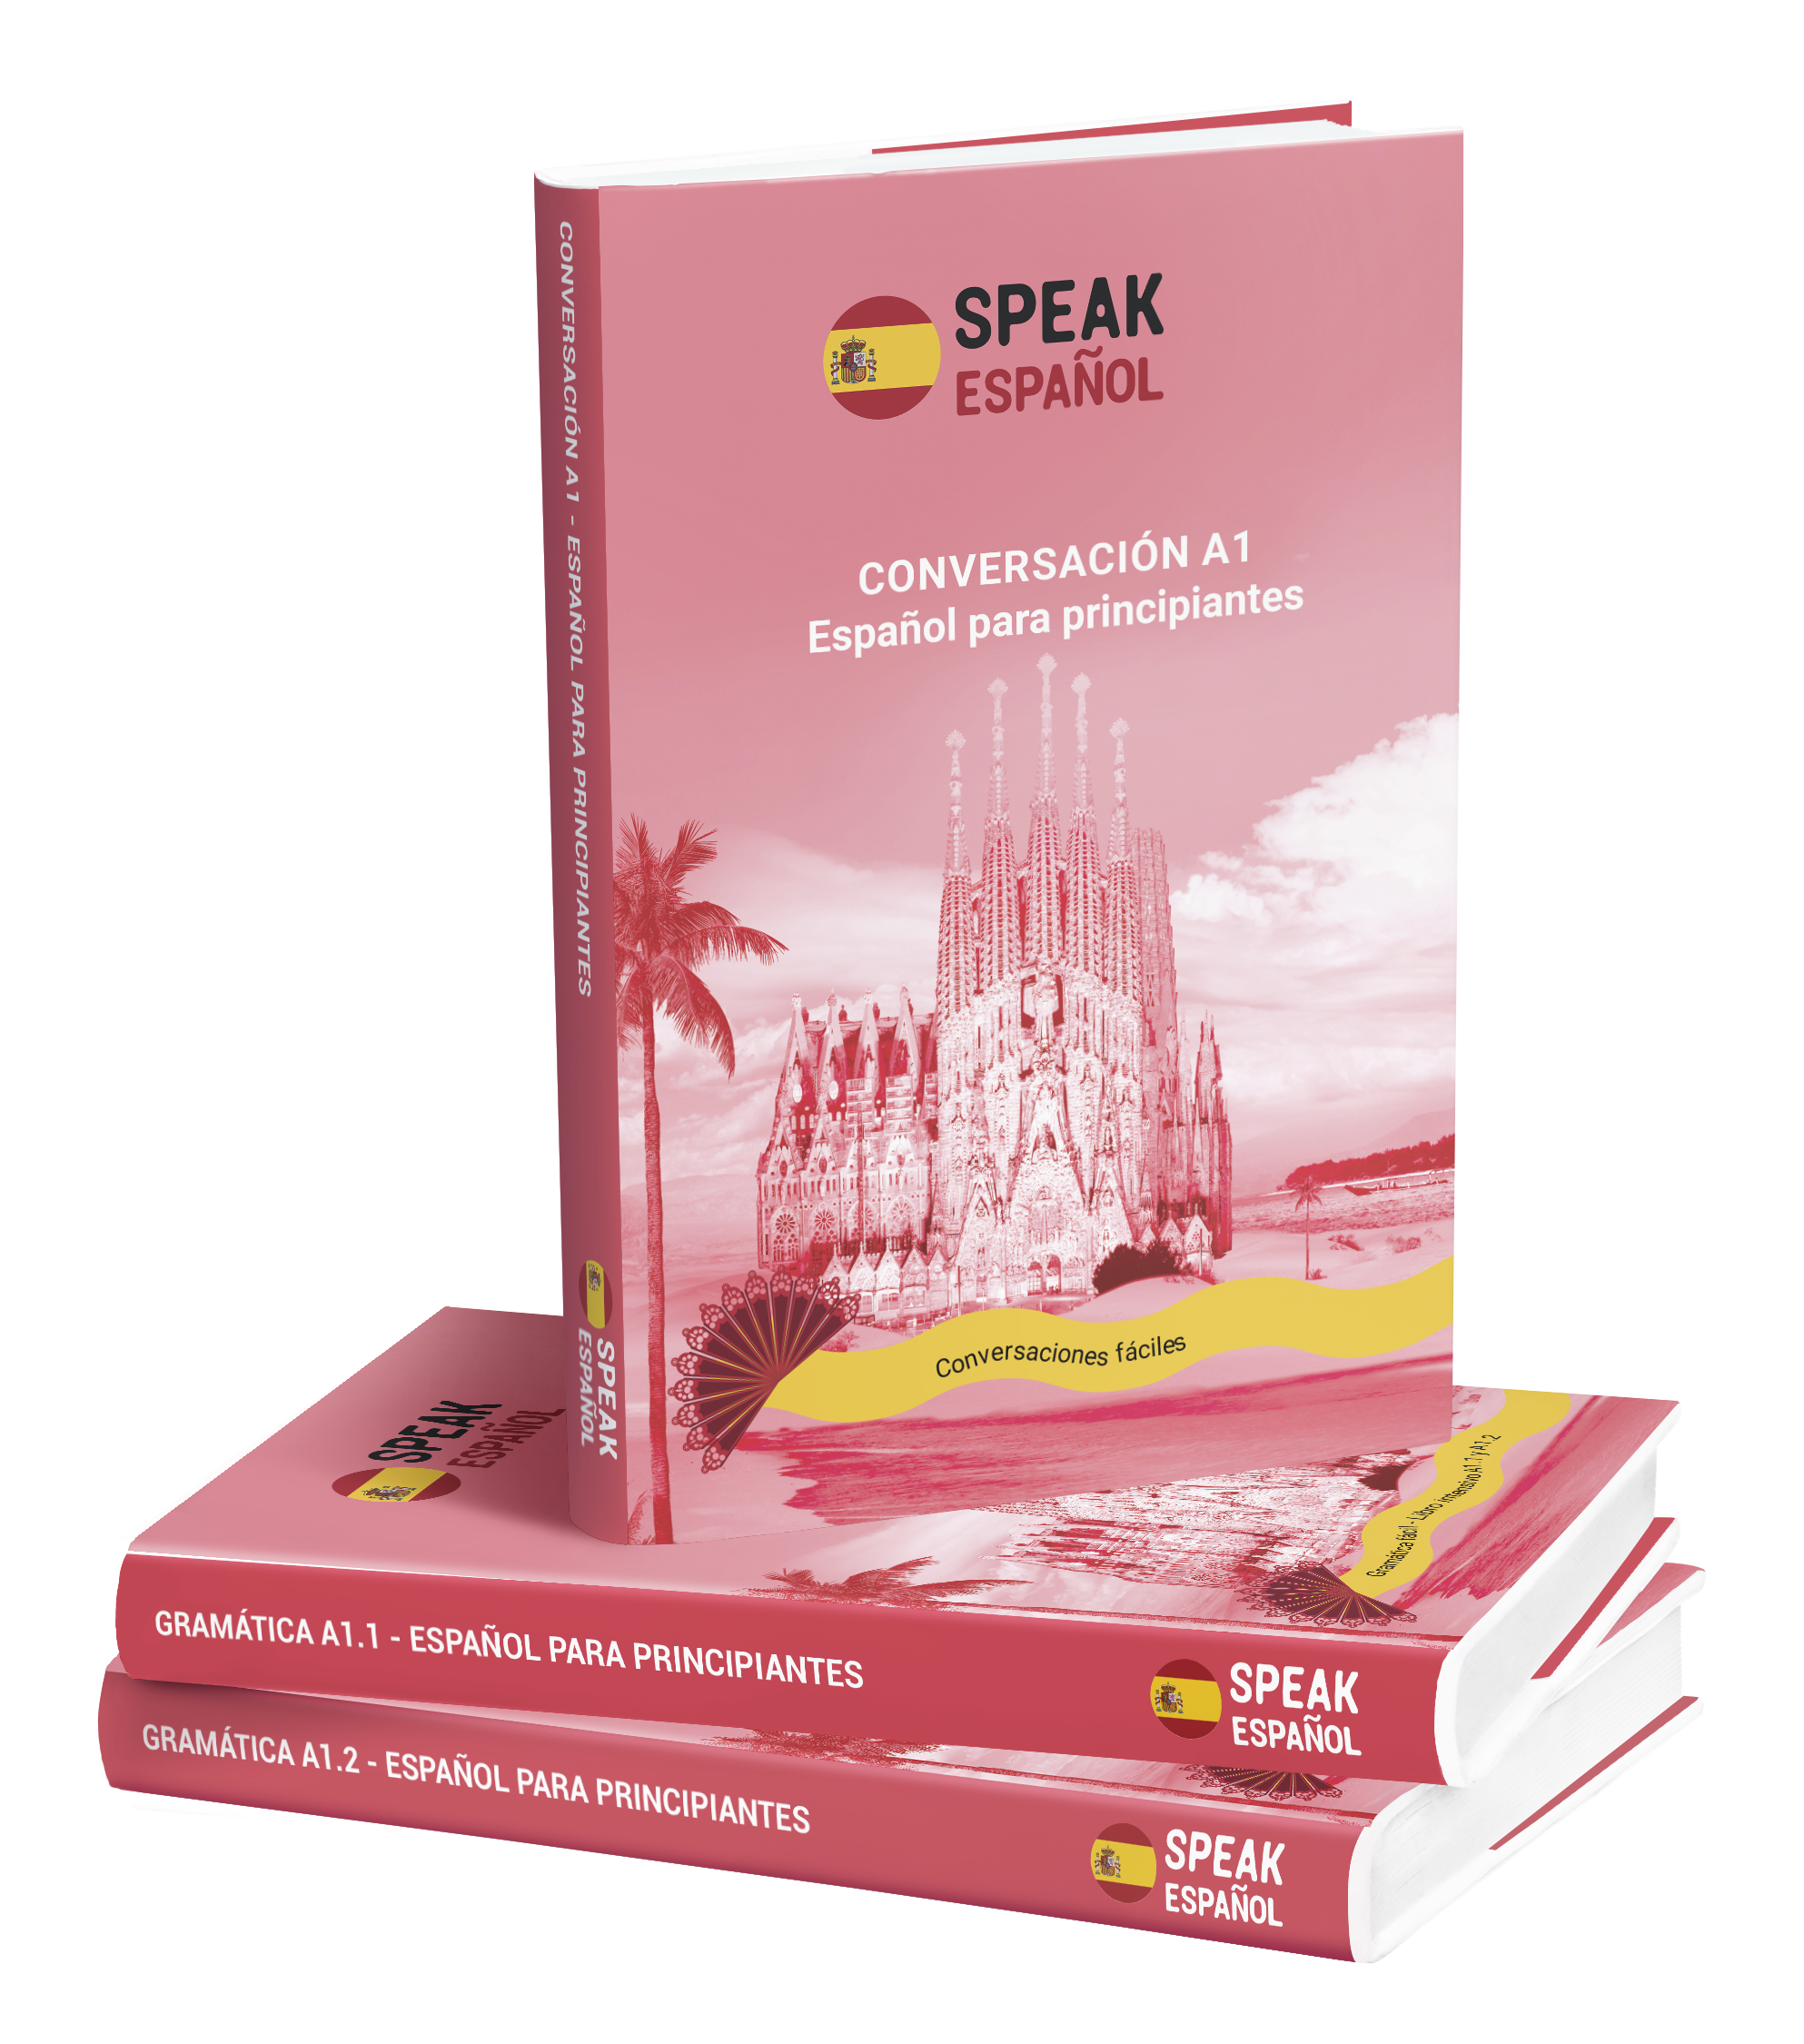 A1 level Spanish course with books included in the price